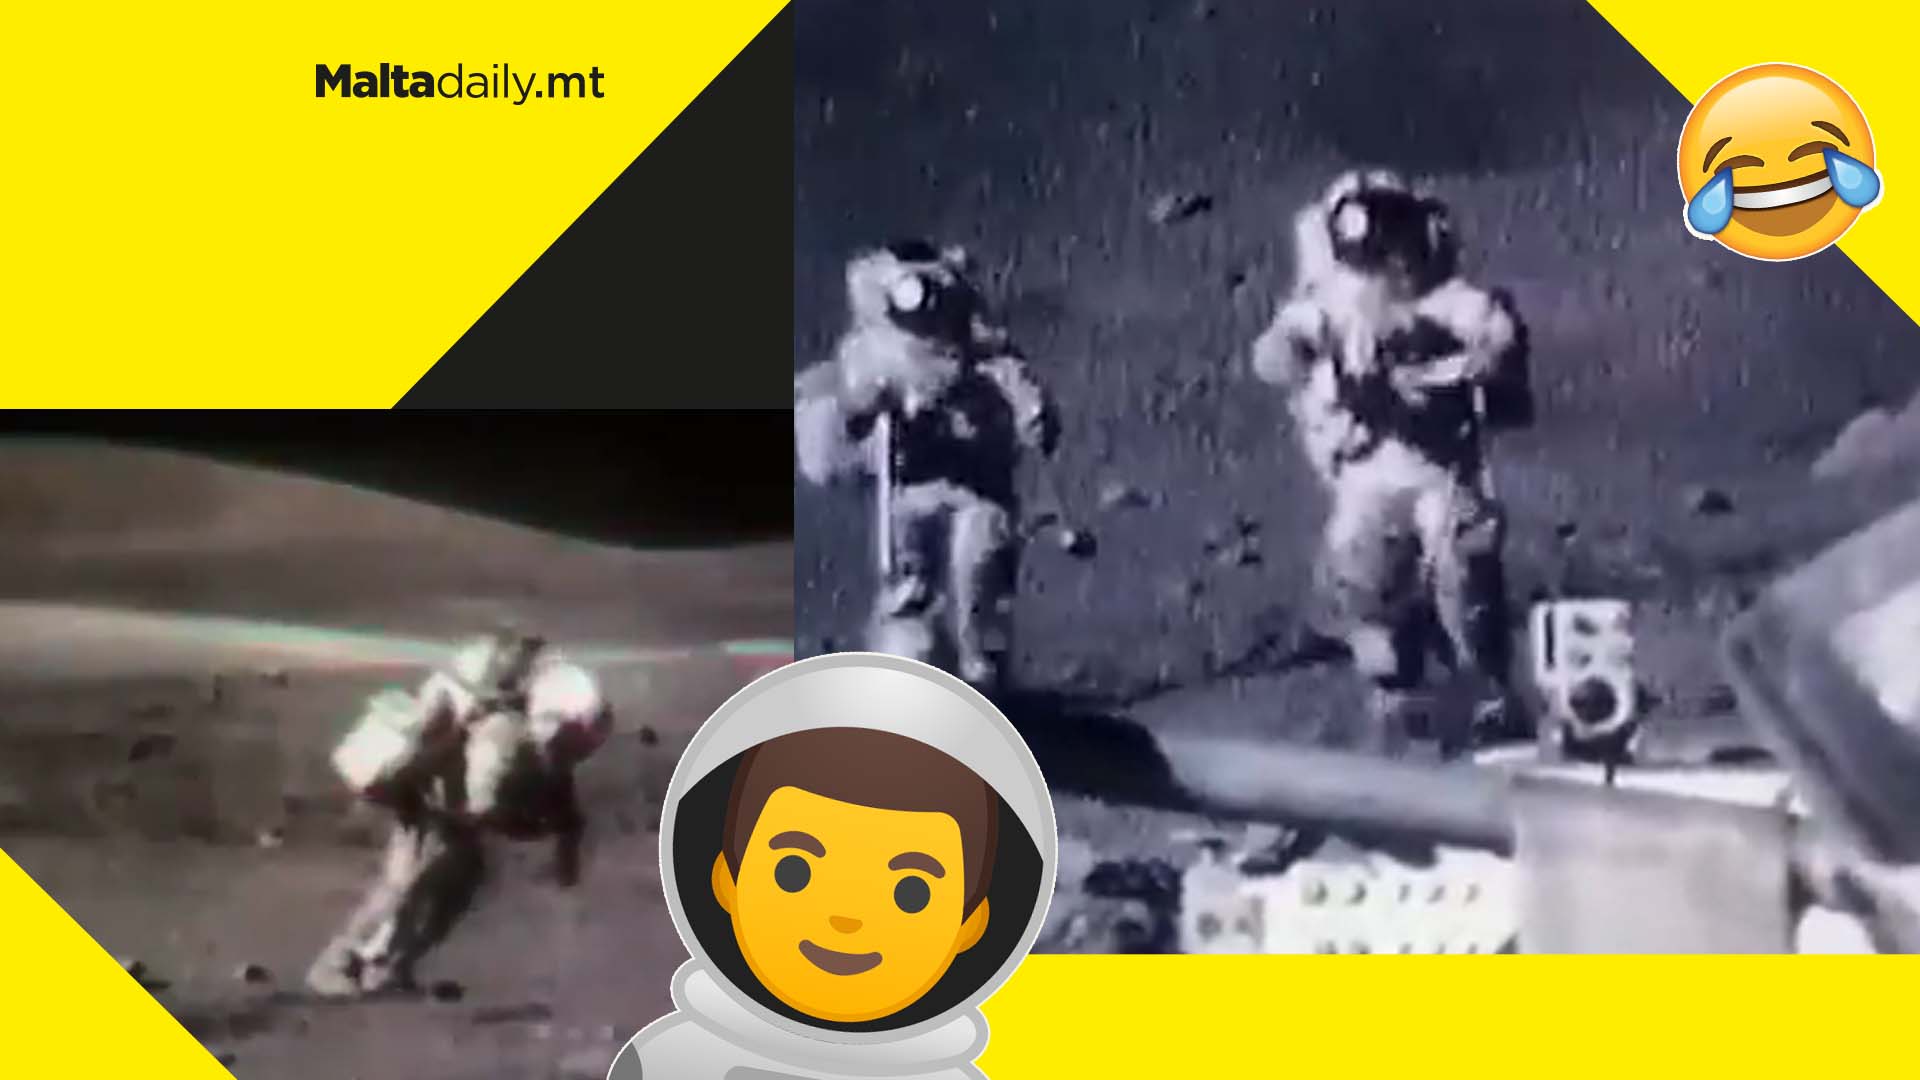 Rare footage of NASA astronauts struggling to walk on moon makes rounds